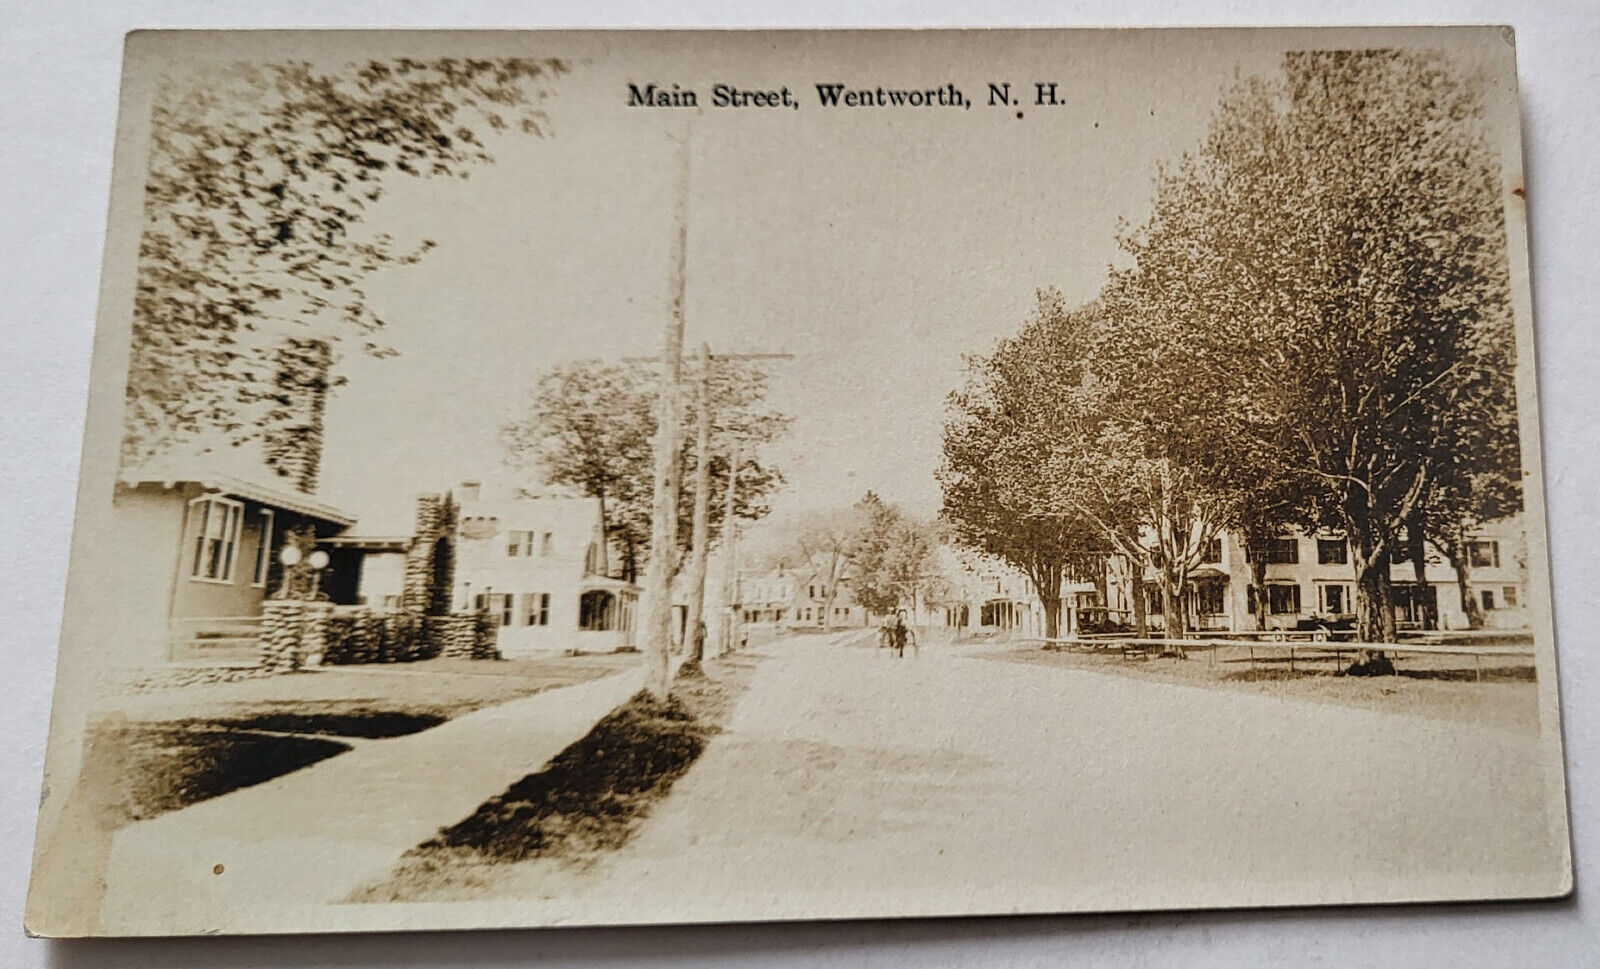 C 1920 RPPC MAIN STREET WENTWORTH NH HOUSES AUTO HORSE & CARRIAGE